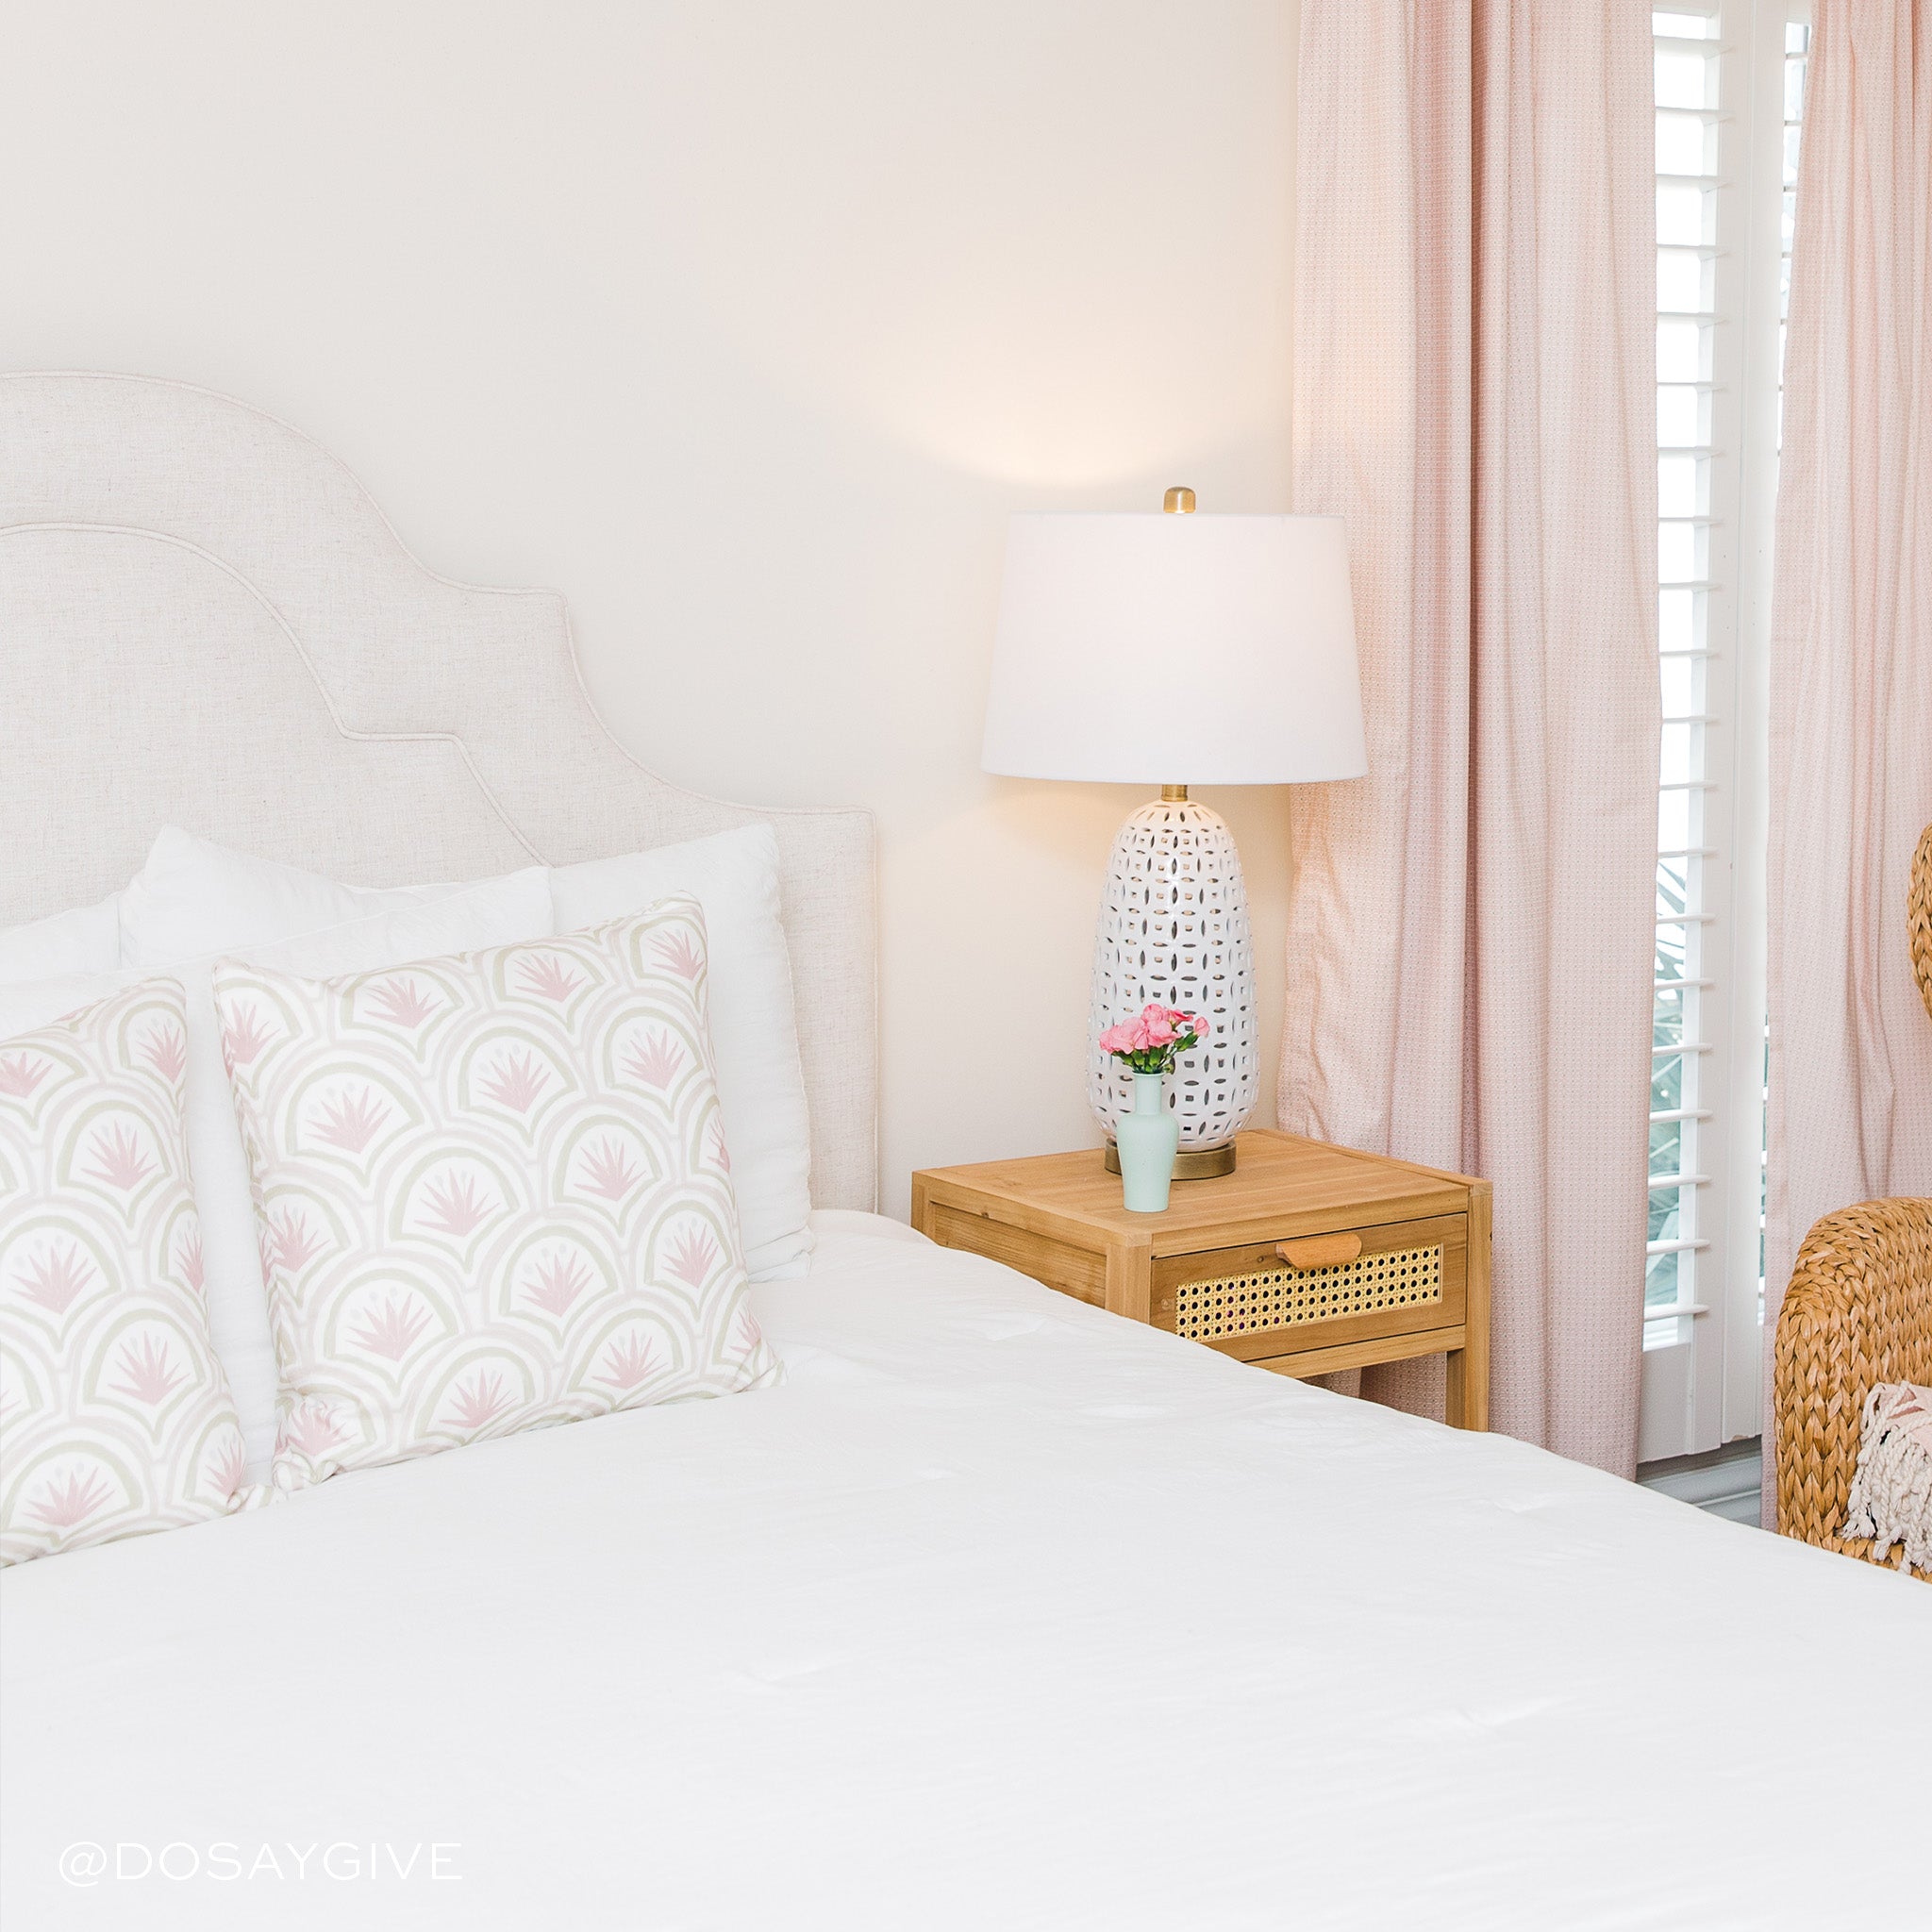 White bed close-up styled with two Pink Art Deco Palm Printed Pillows next to wooden nightstand with white lamp and flowers in vase on top next to Pink Geometric Printed Curtains